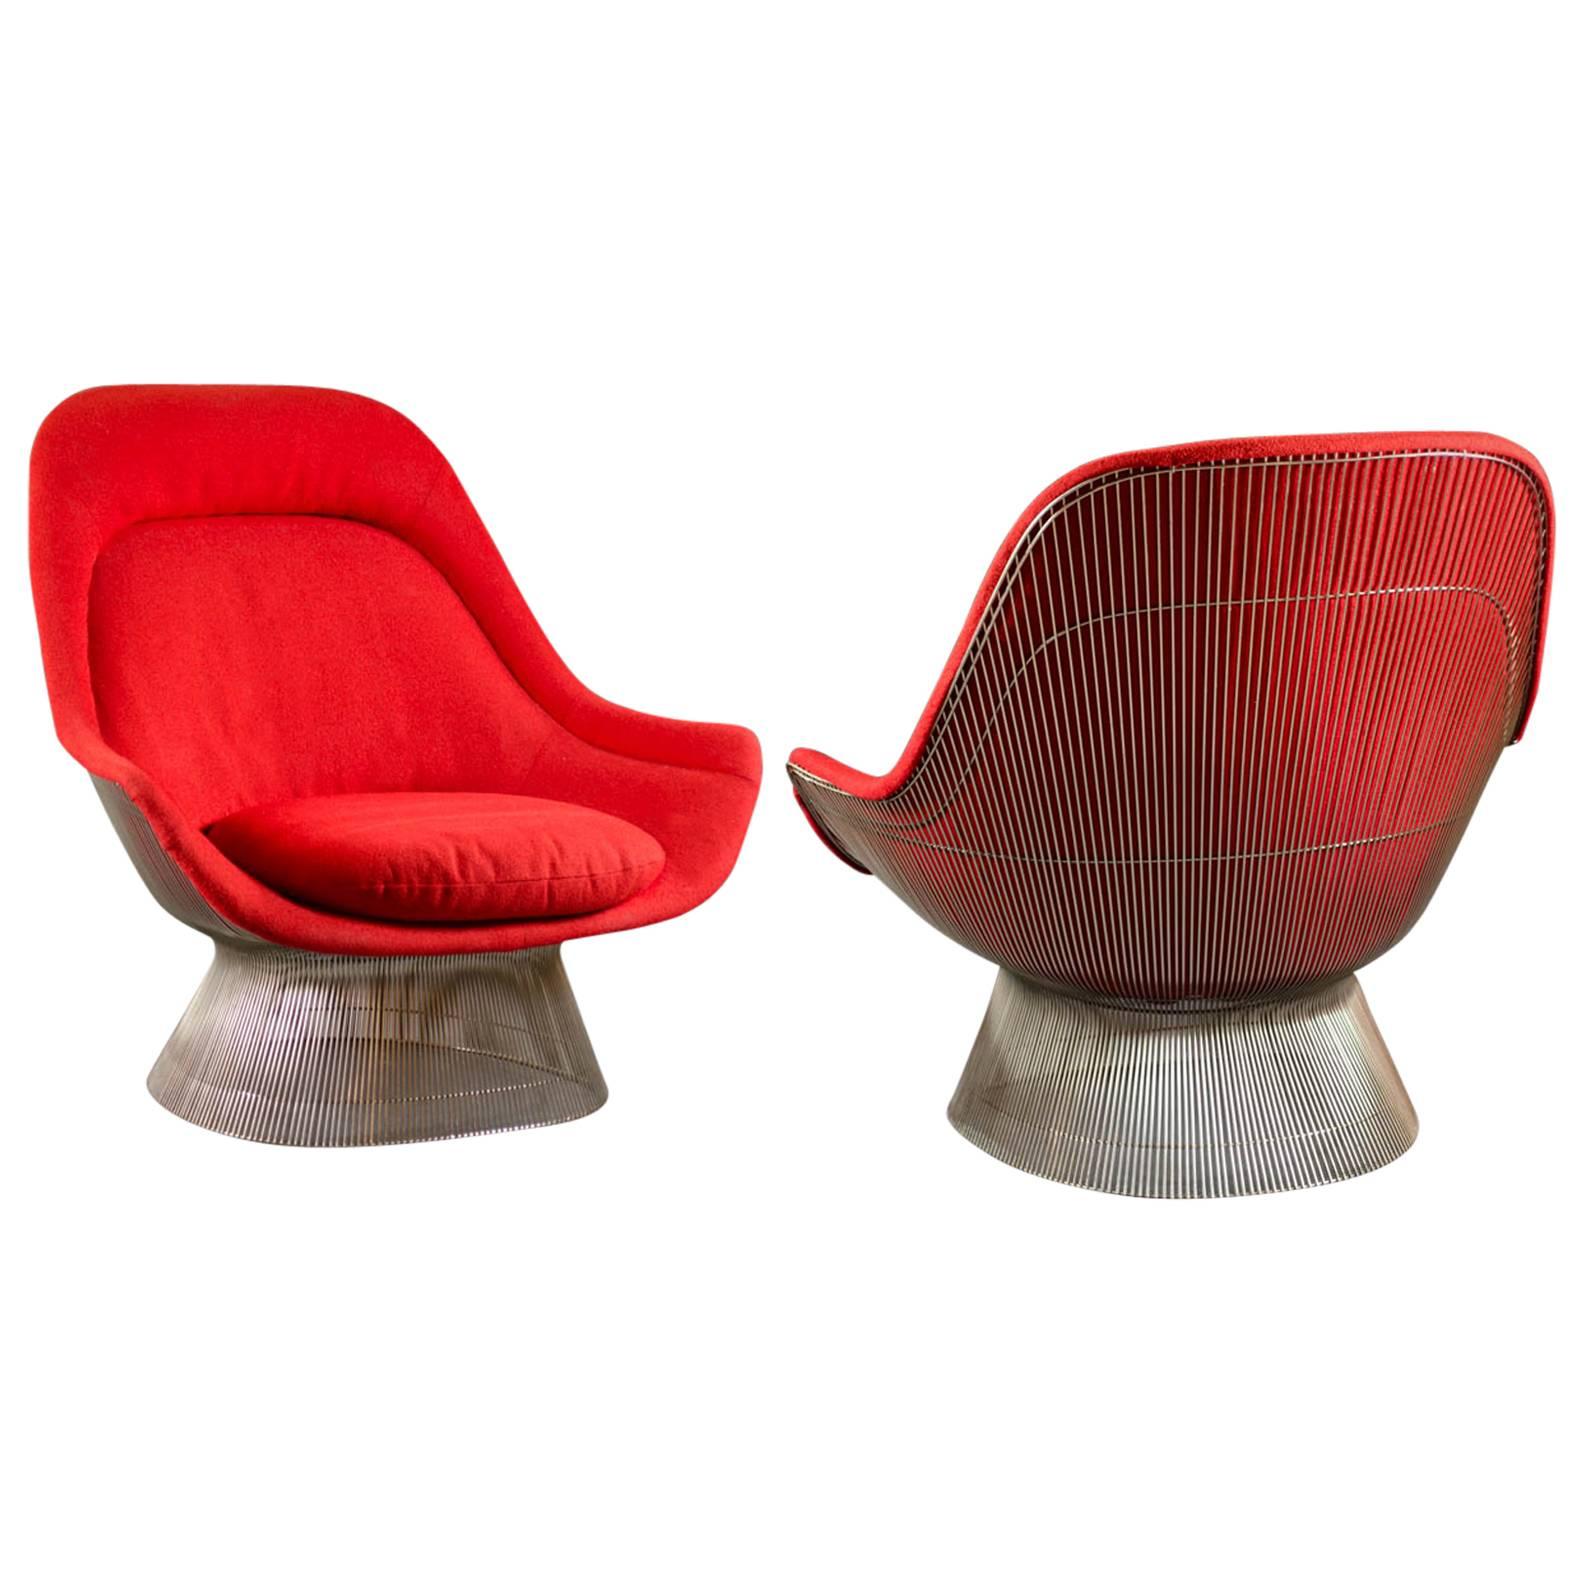 Pair of Lounge Chairs by Warren Platner for Knoll